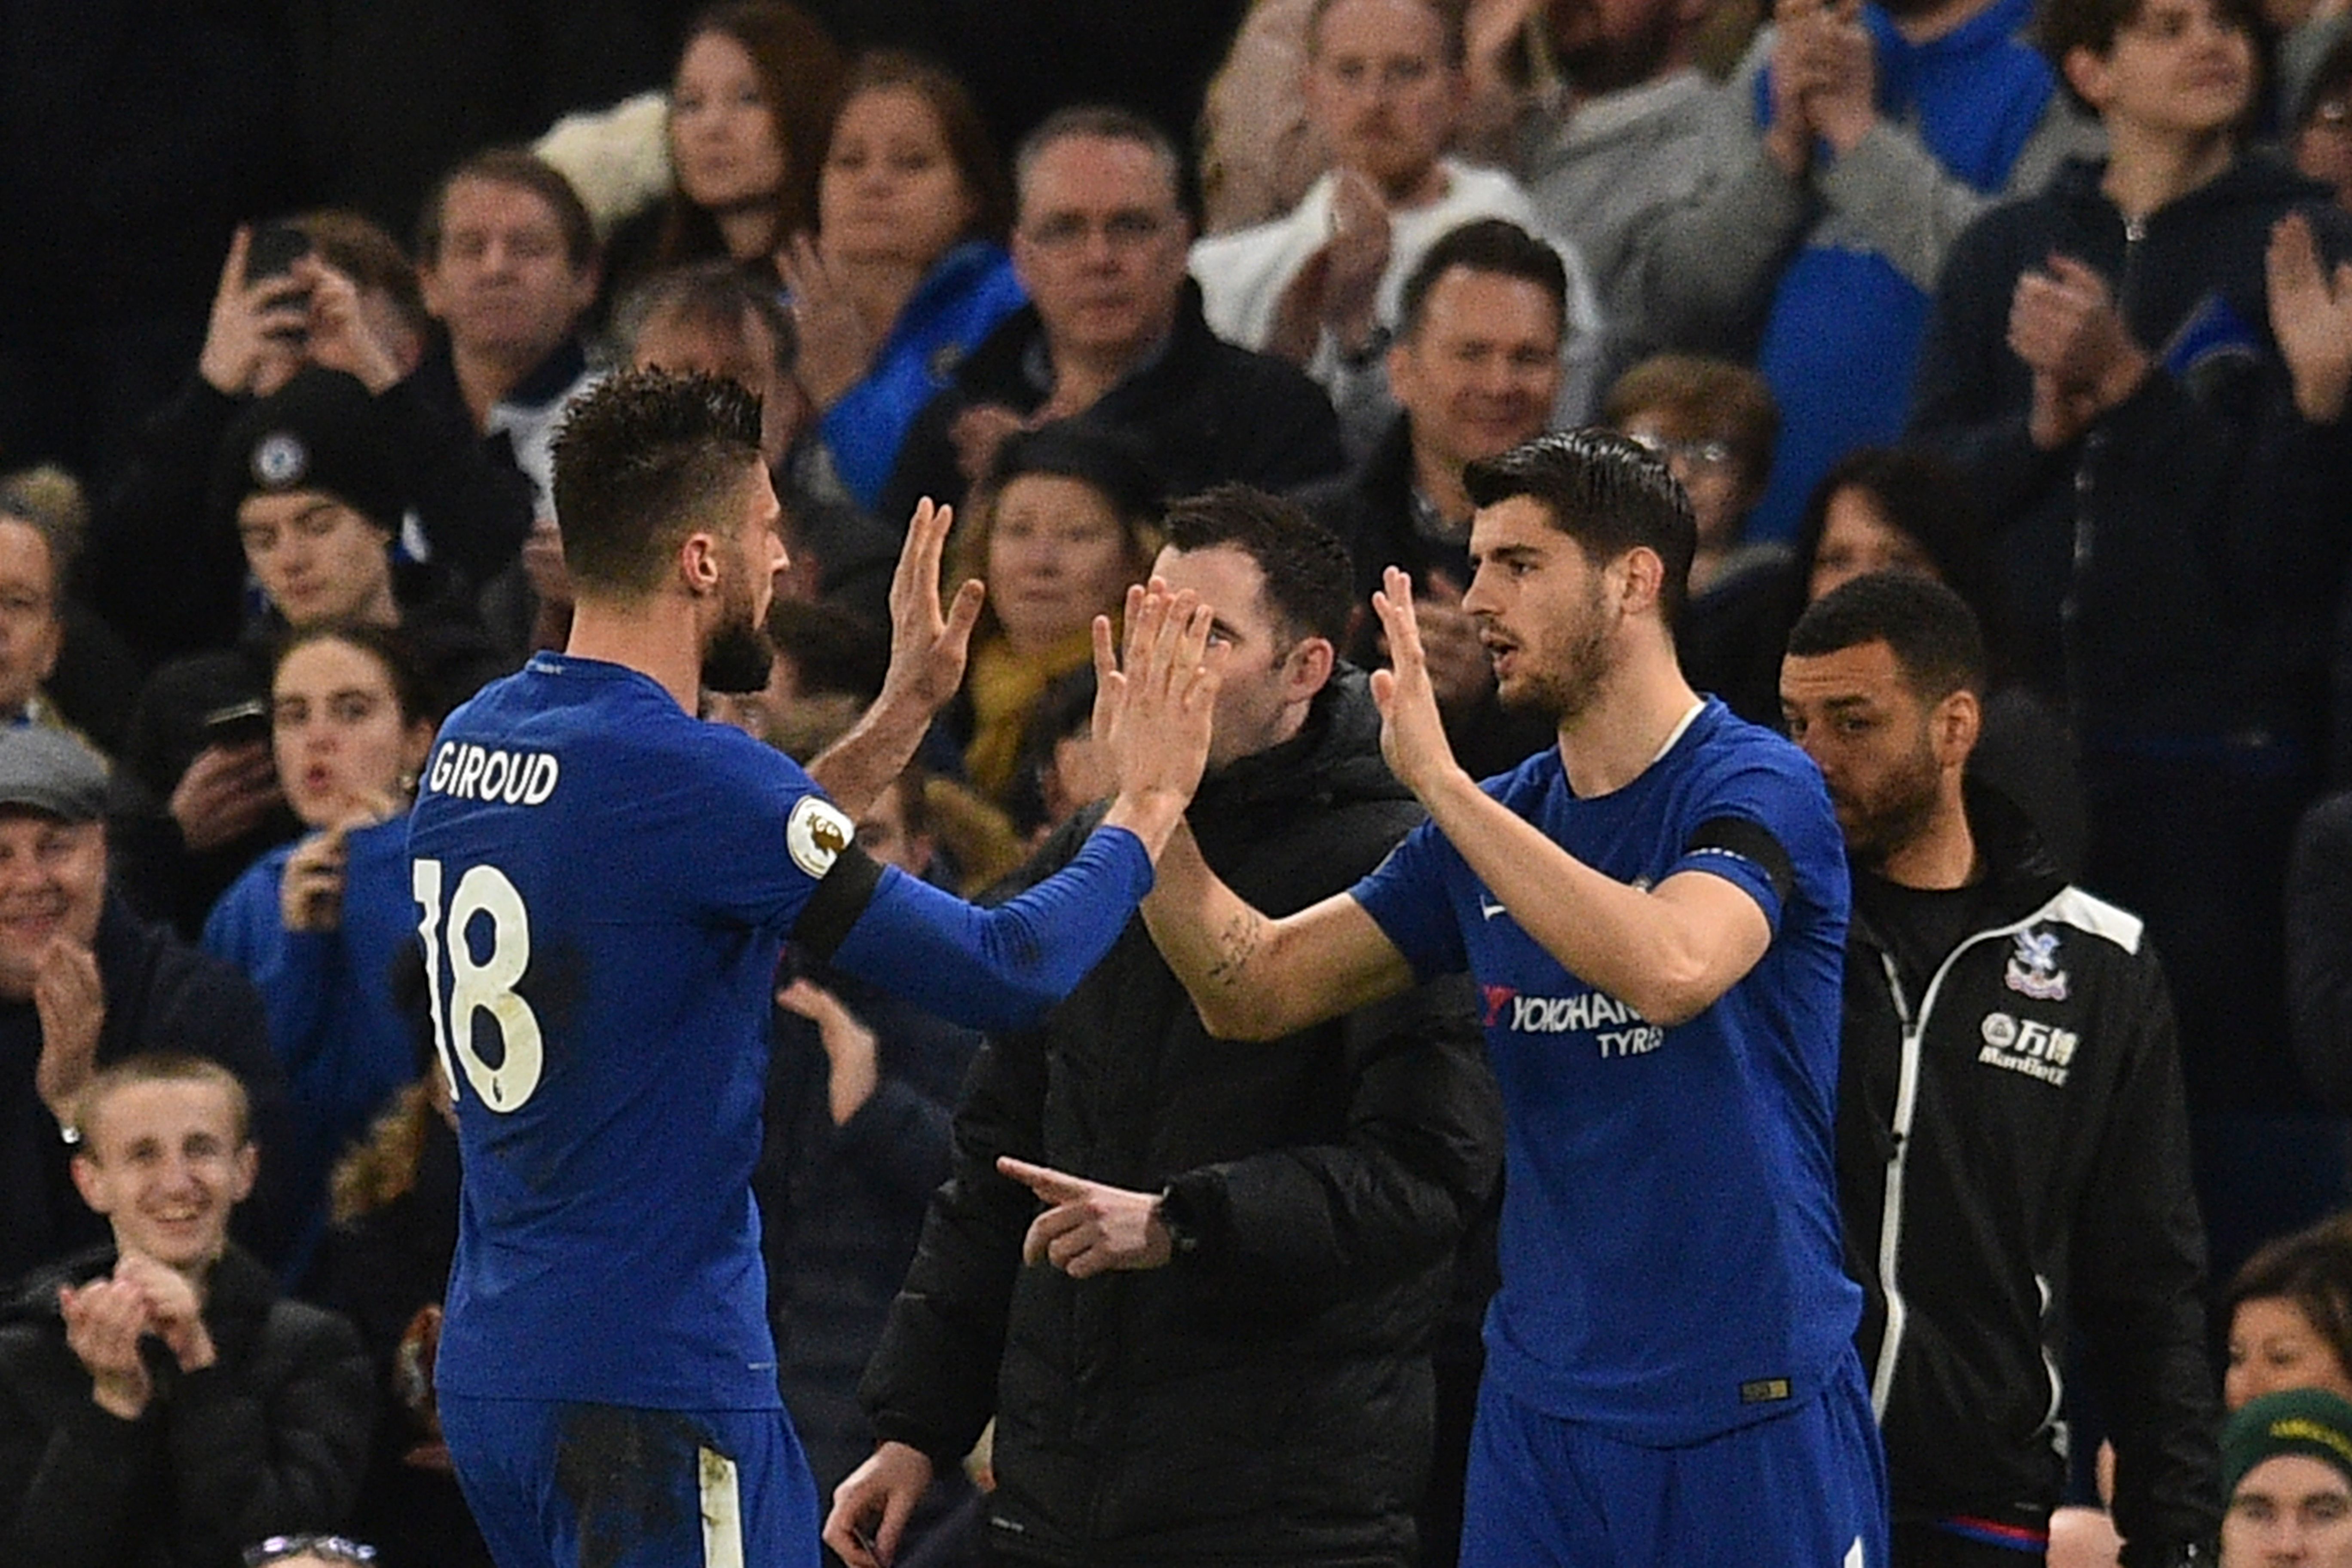 Chelsea's French attacker Olivier Giroud (L) high-fives his replacement Chelsea's Spanish striker Alvaro Morata (R) as he goes off as a substitute during the English Premier League football match between Chelsea and Crystal Palace at Stamford Bridge in London on March 10, 2018. / AFP PHOTO / Glyn KIRK / RESTRICTED TO EDITORIAL USE. No use with unauthorized audio, video, data, fixture lists, club/league logos or 'live' services. Online in-match use limited to 75 images, no video emulation. No use in betting, games or single club/league/player publications.  /         (Photo credit should read GLYN KIRK/AFP/Getty Images)